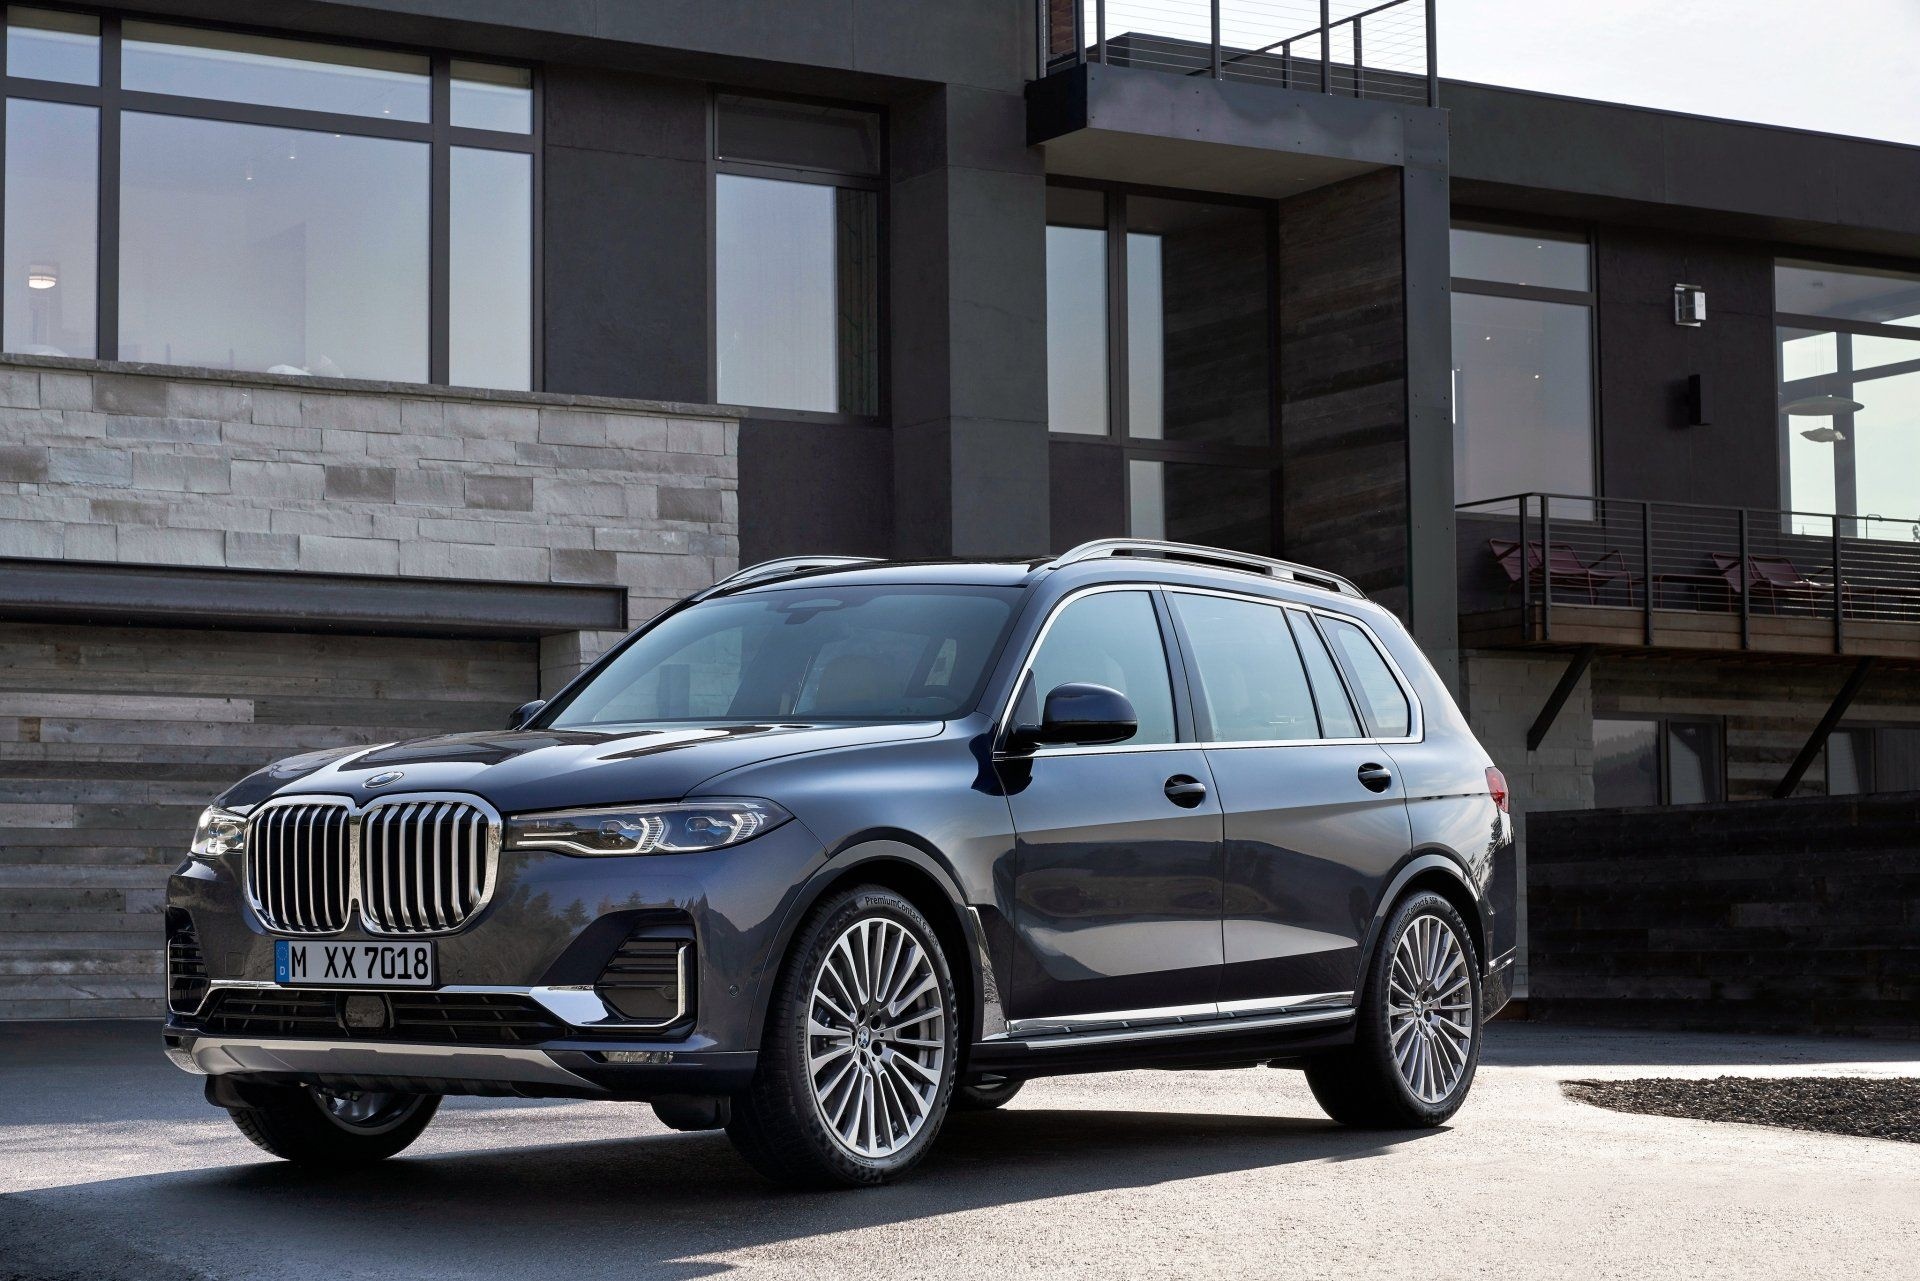 BMW X7, Exquisite luxury, Innovation at its finest, Captivating design, 1920x1290 HD Desktop